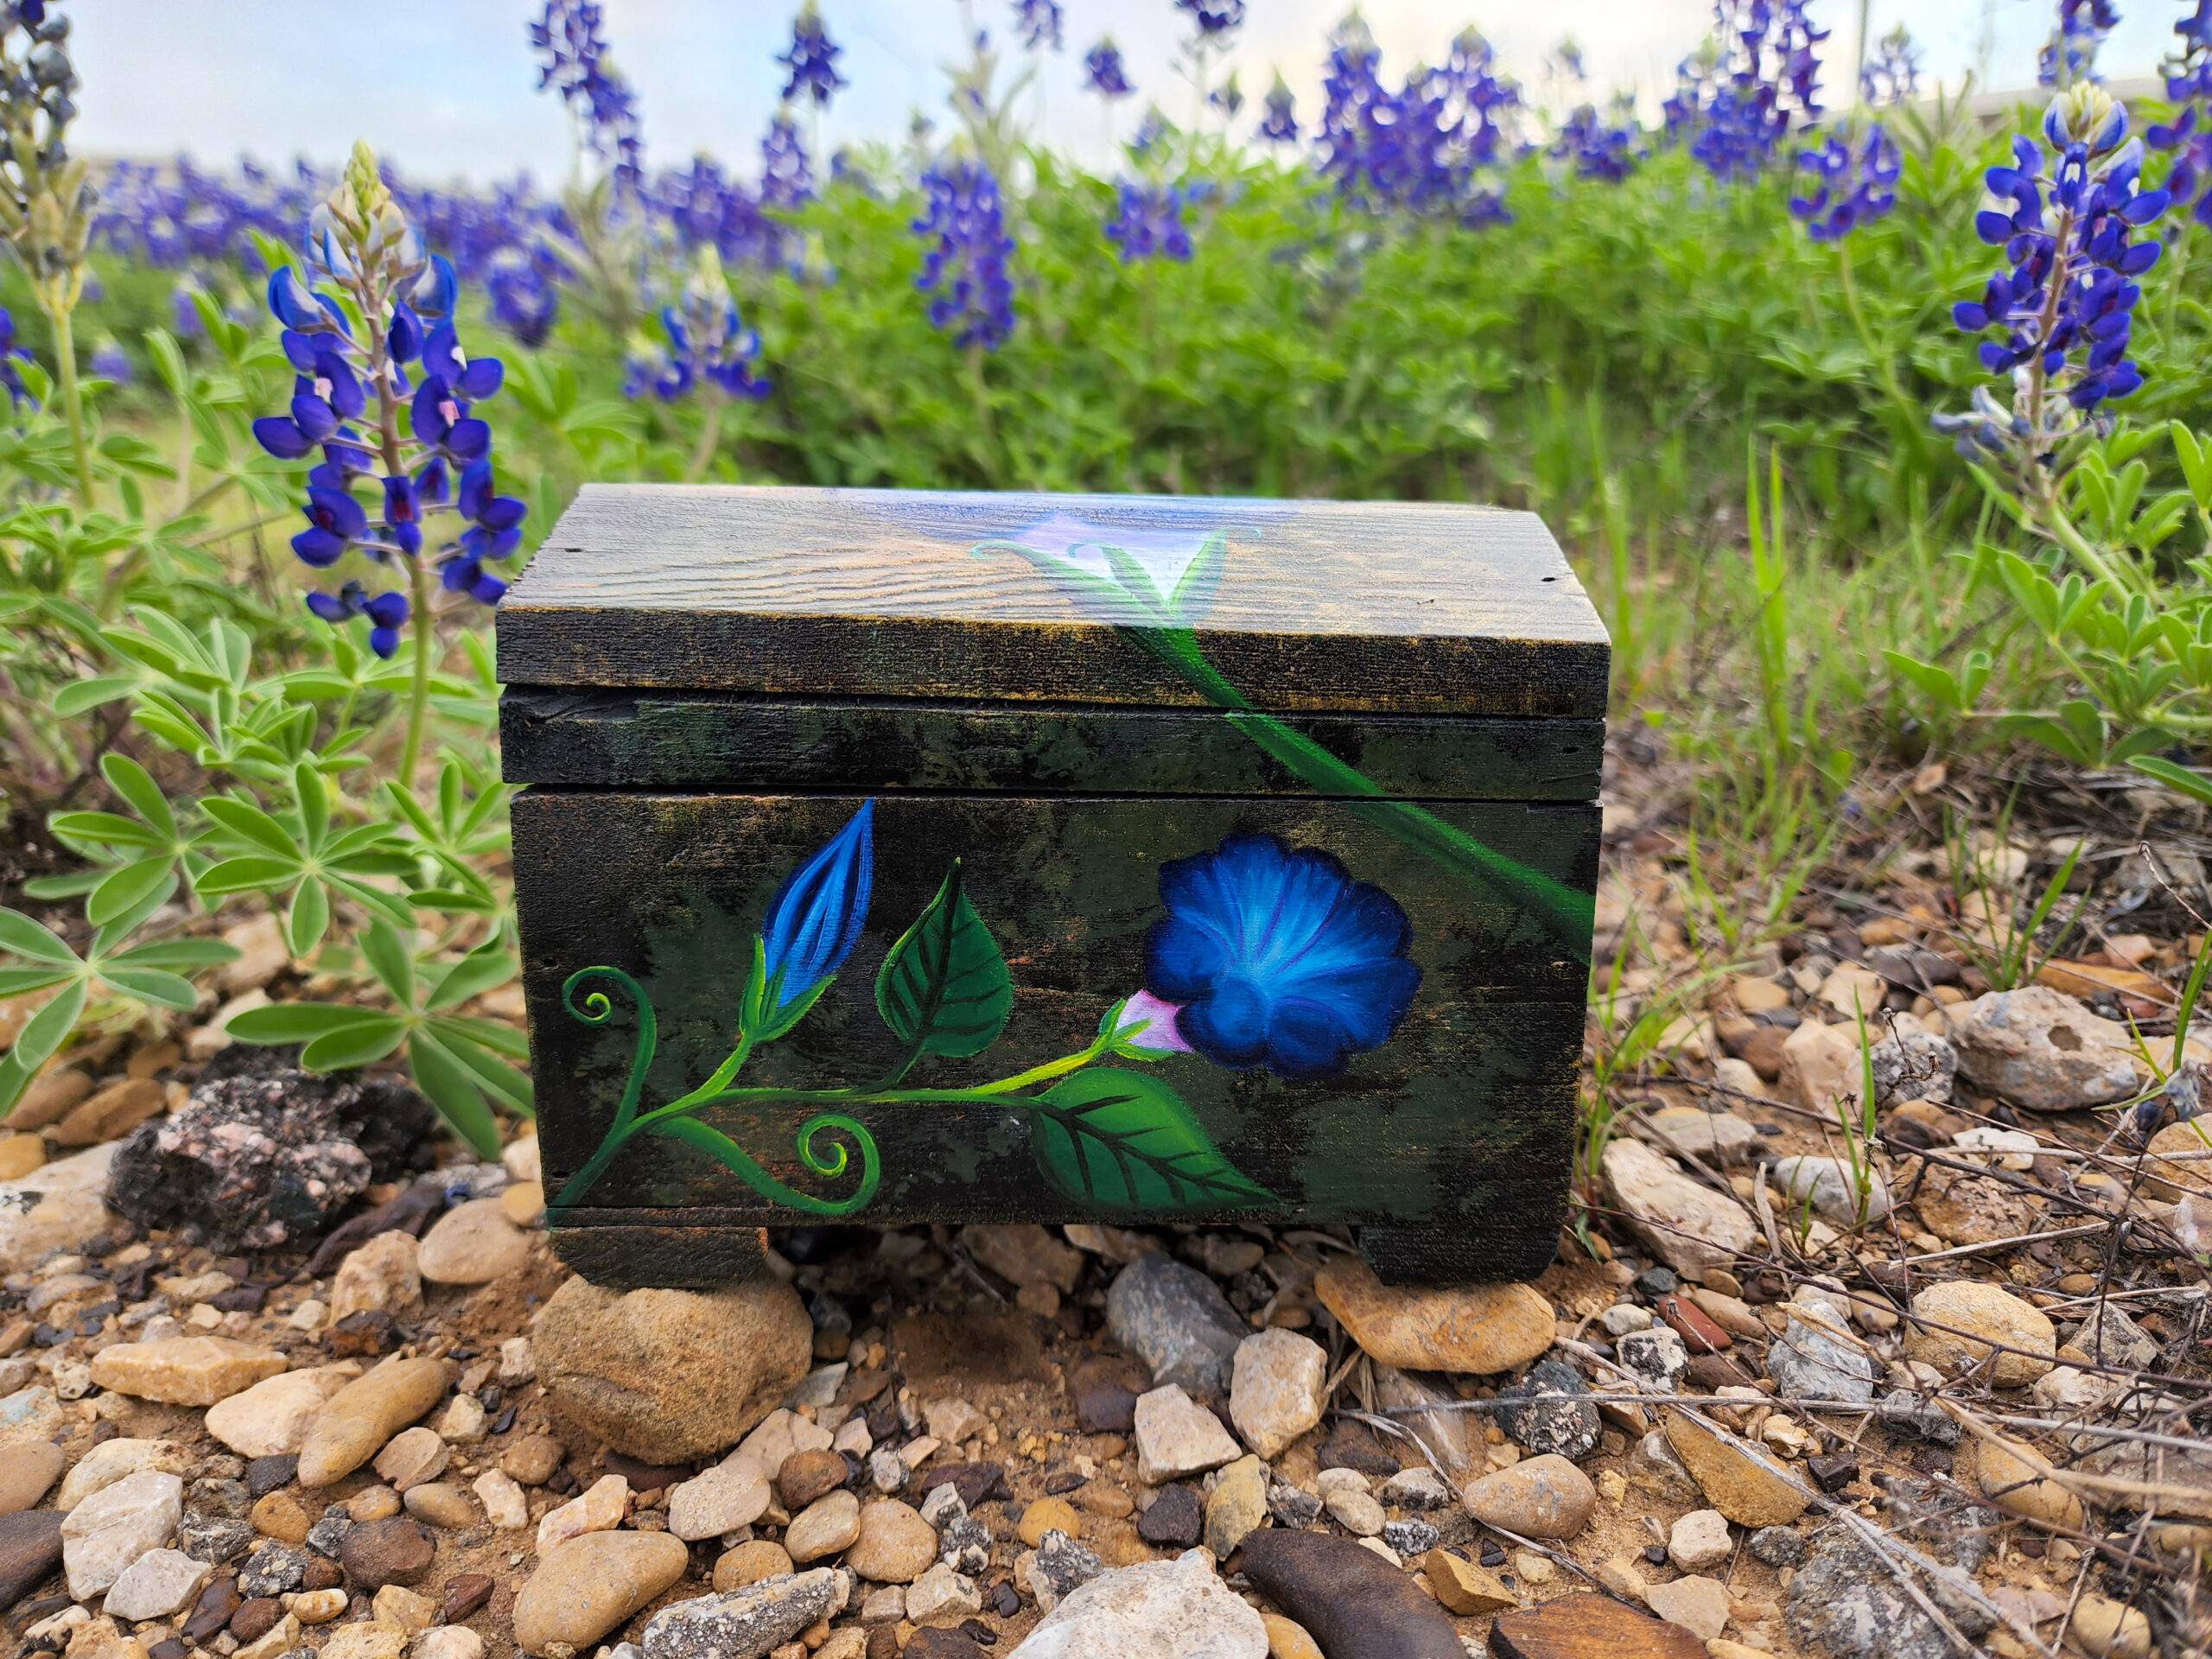 This is one of a kind handpainted wood trinket box with tiny mirrors inside. This cute trinket box is an ideal gift for a special loved one. You can store jewelry such as rings, necklaces, bracelets, or anything you would like to keep in a particular place, especially in this elegant and artistic trinket box.